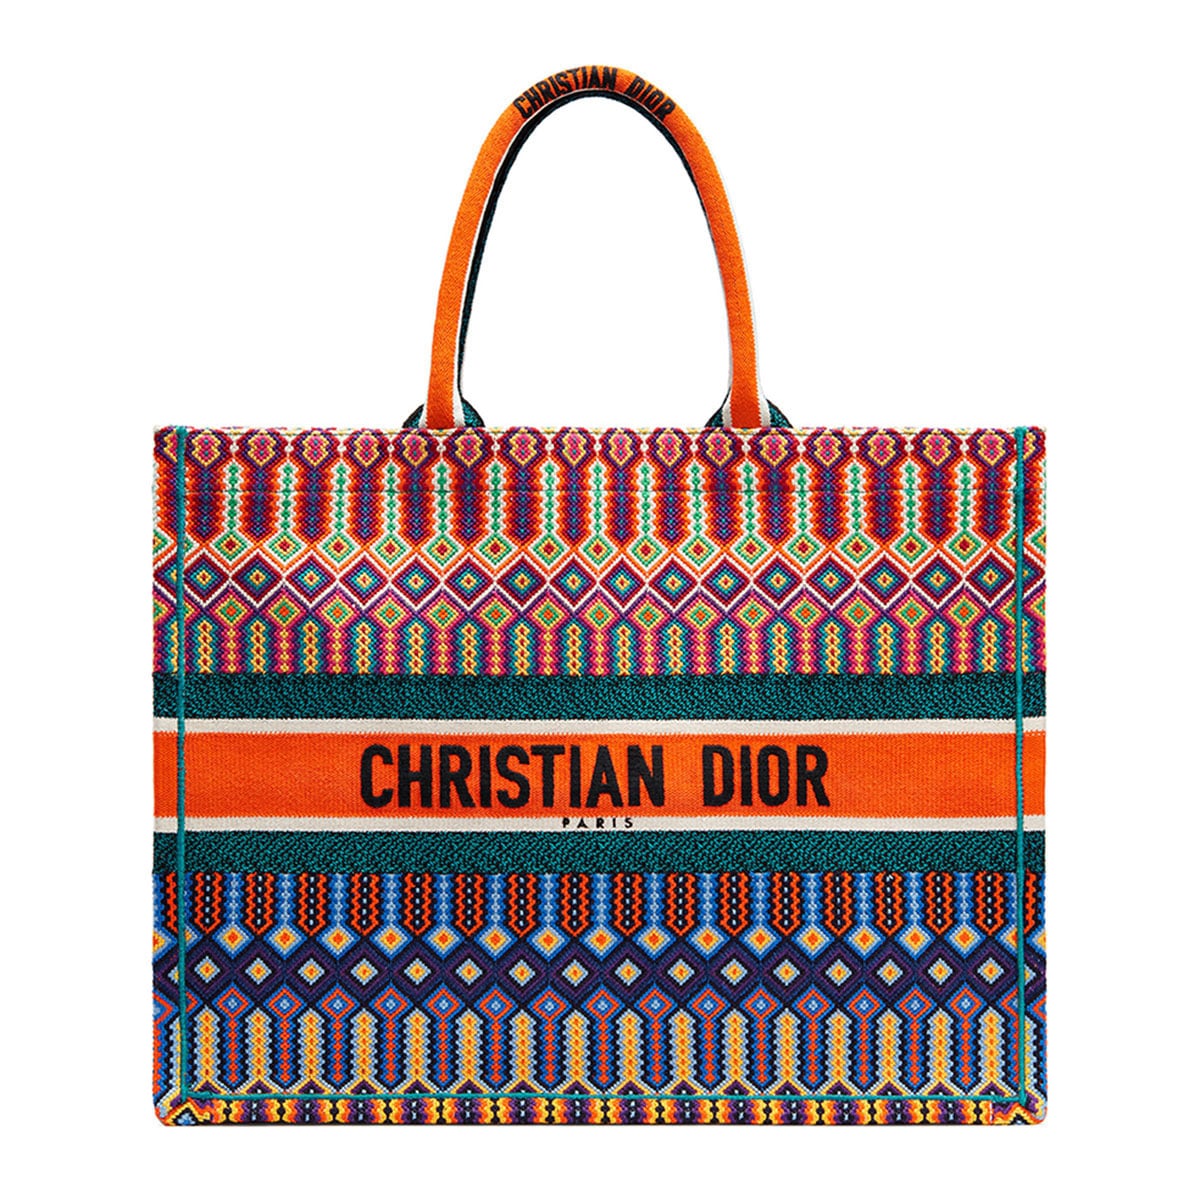 Dior Book Tote Bag Reference Guide | Spotted Fashion